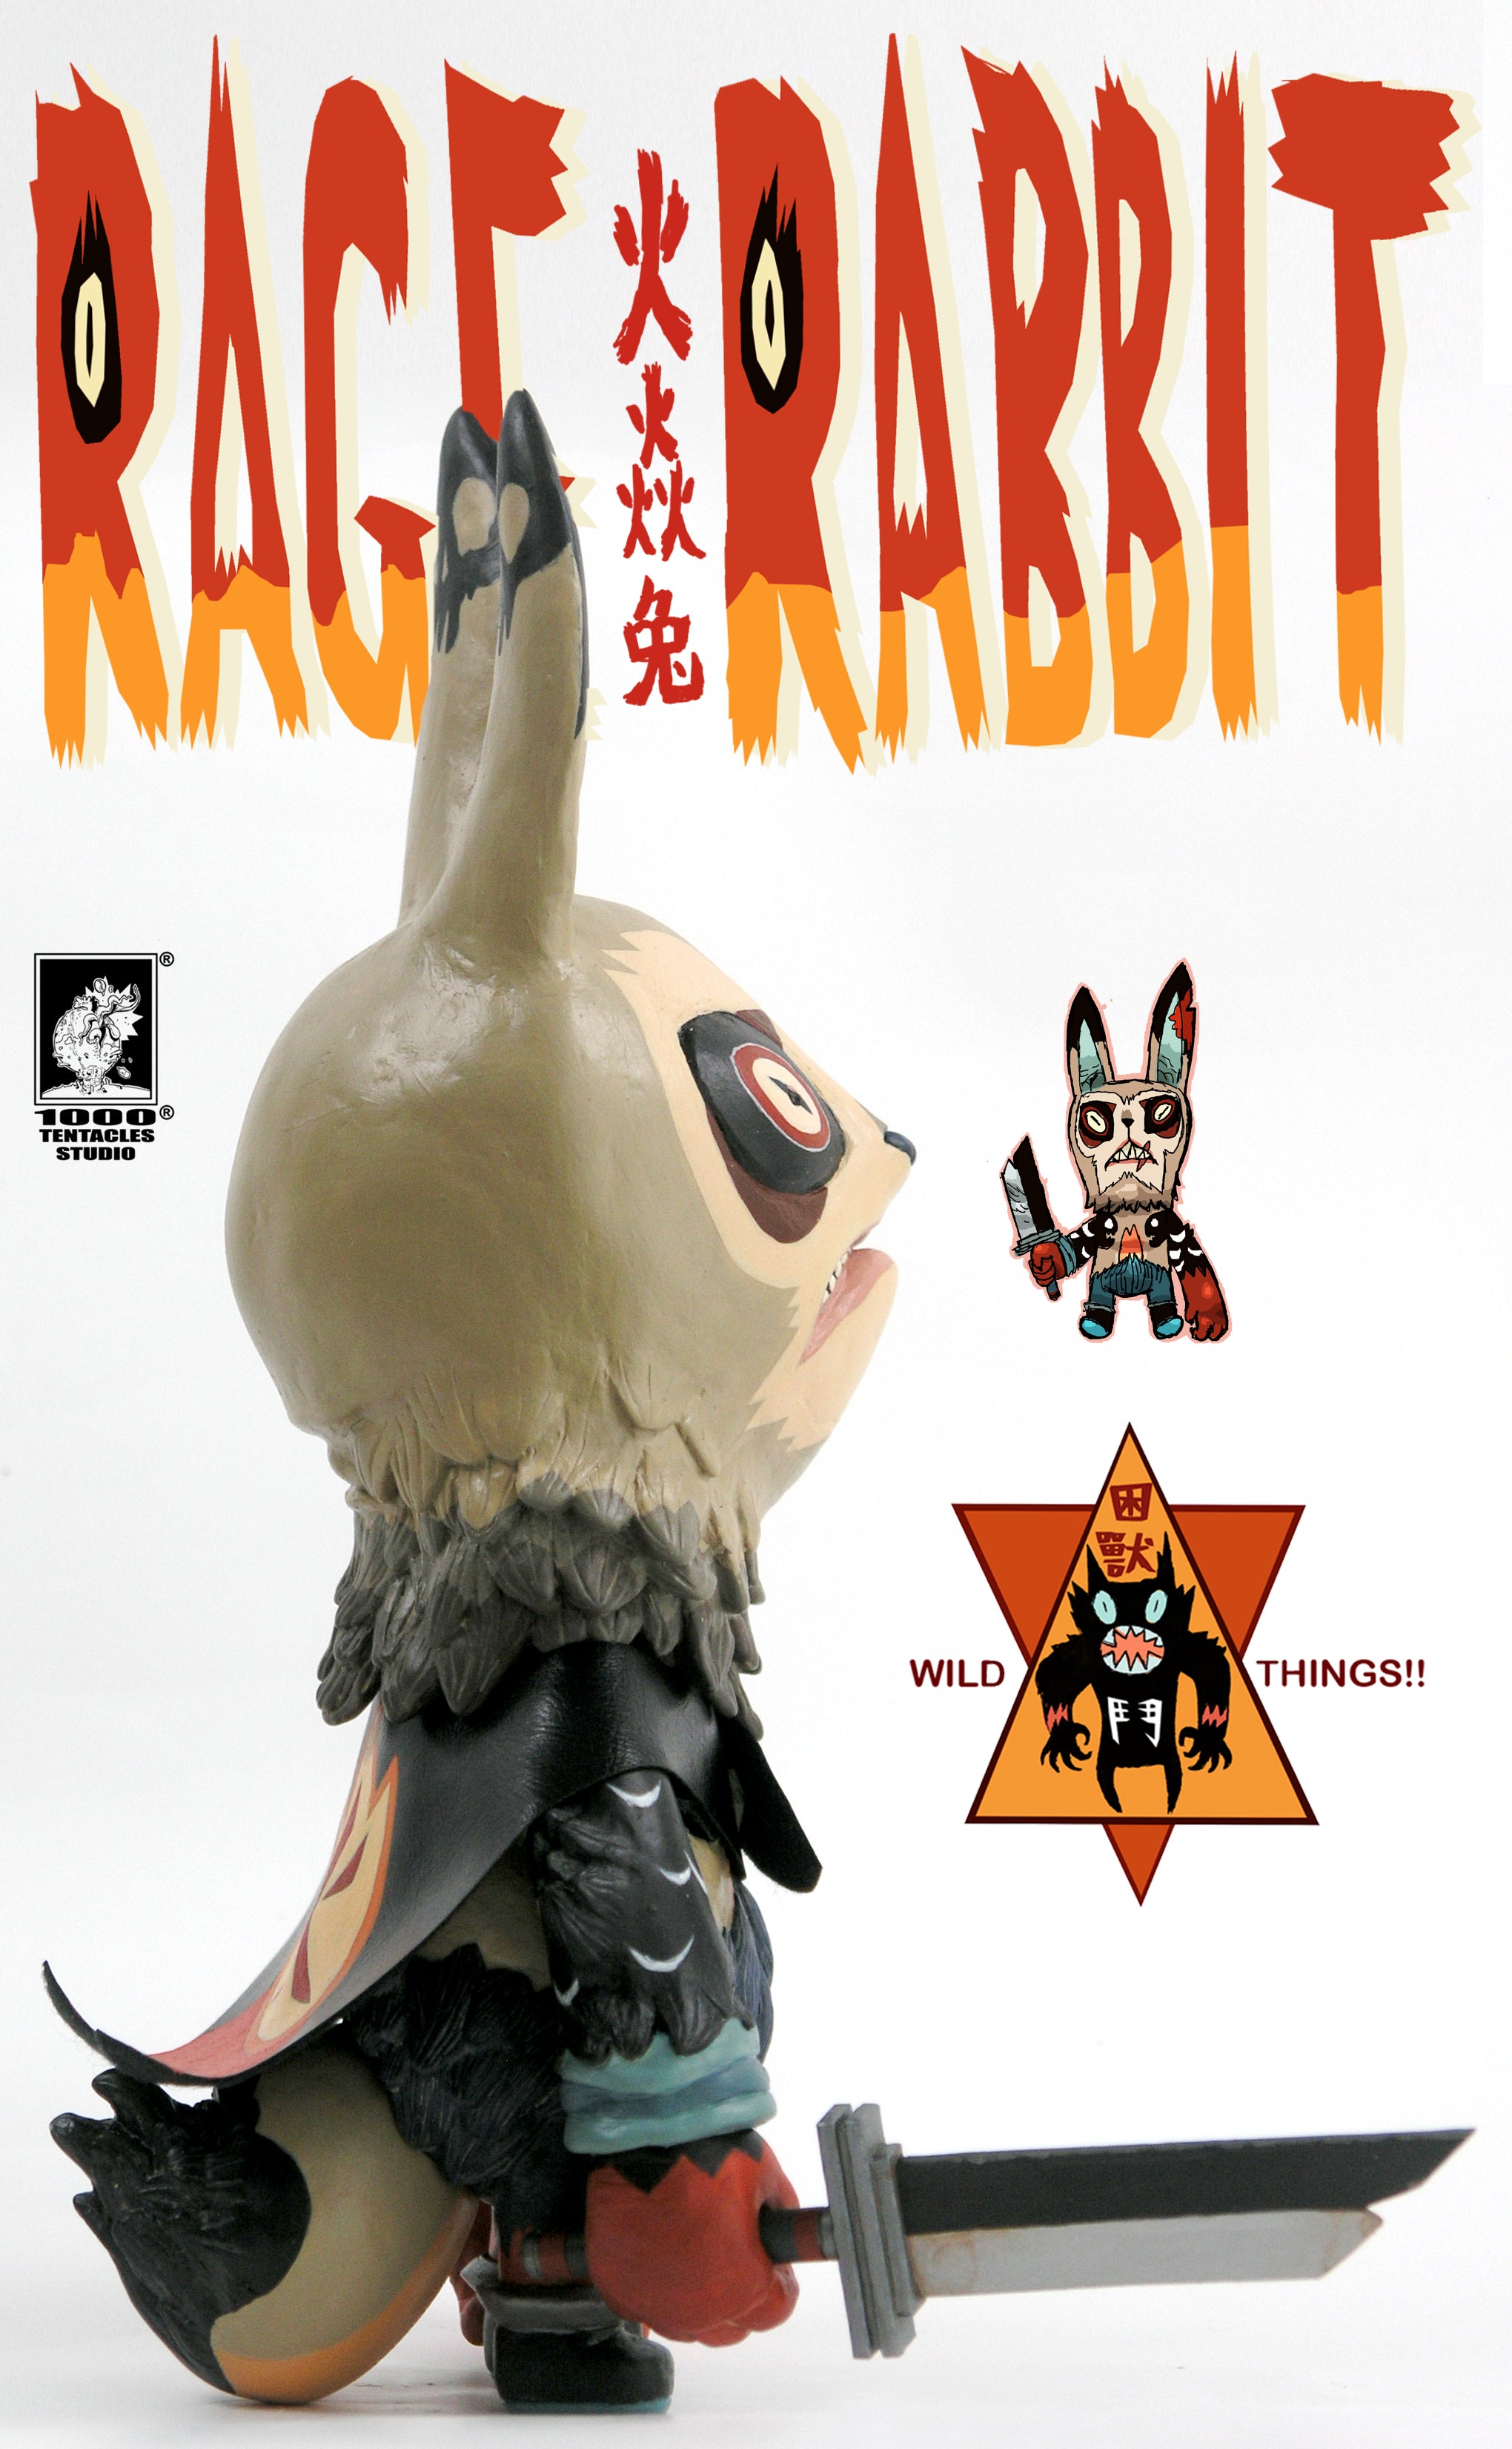 Rage Rabbit by 1000 Tentacles